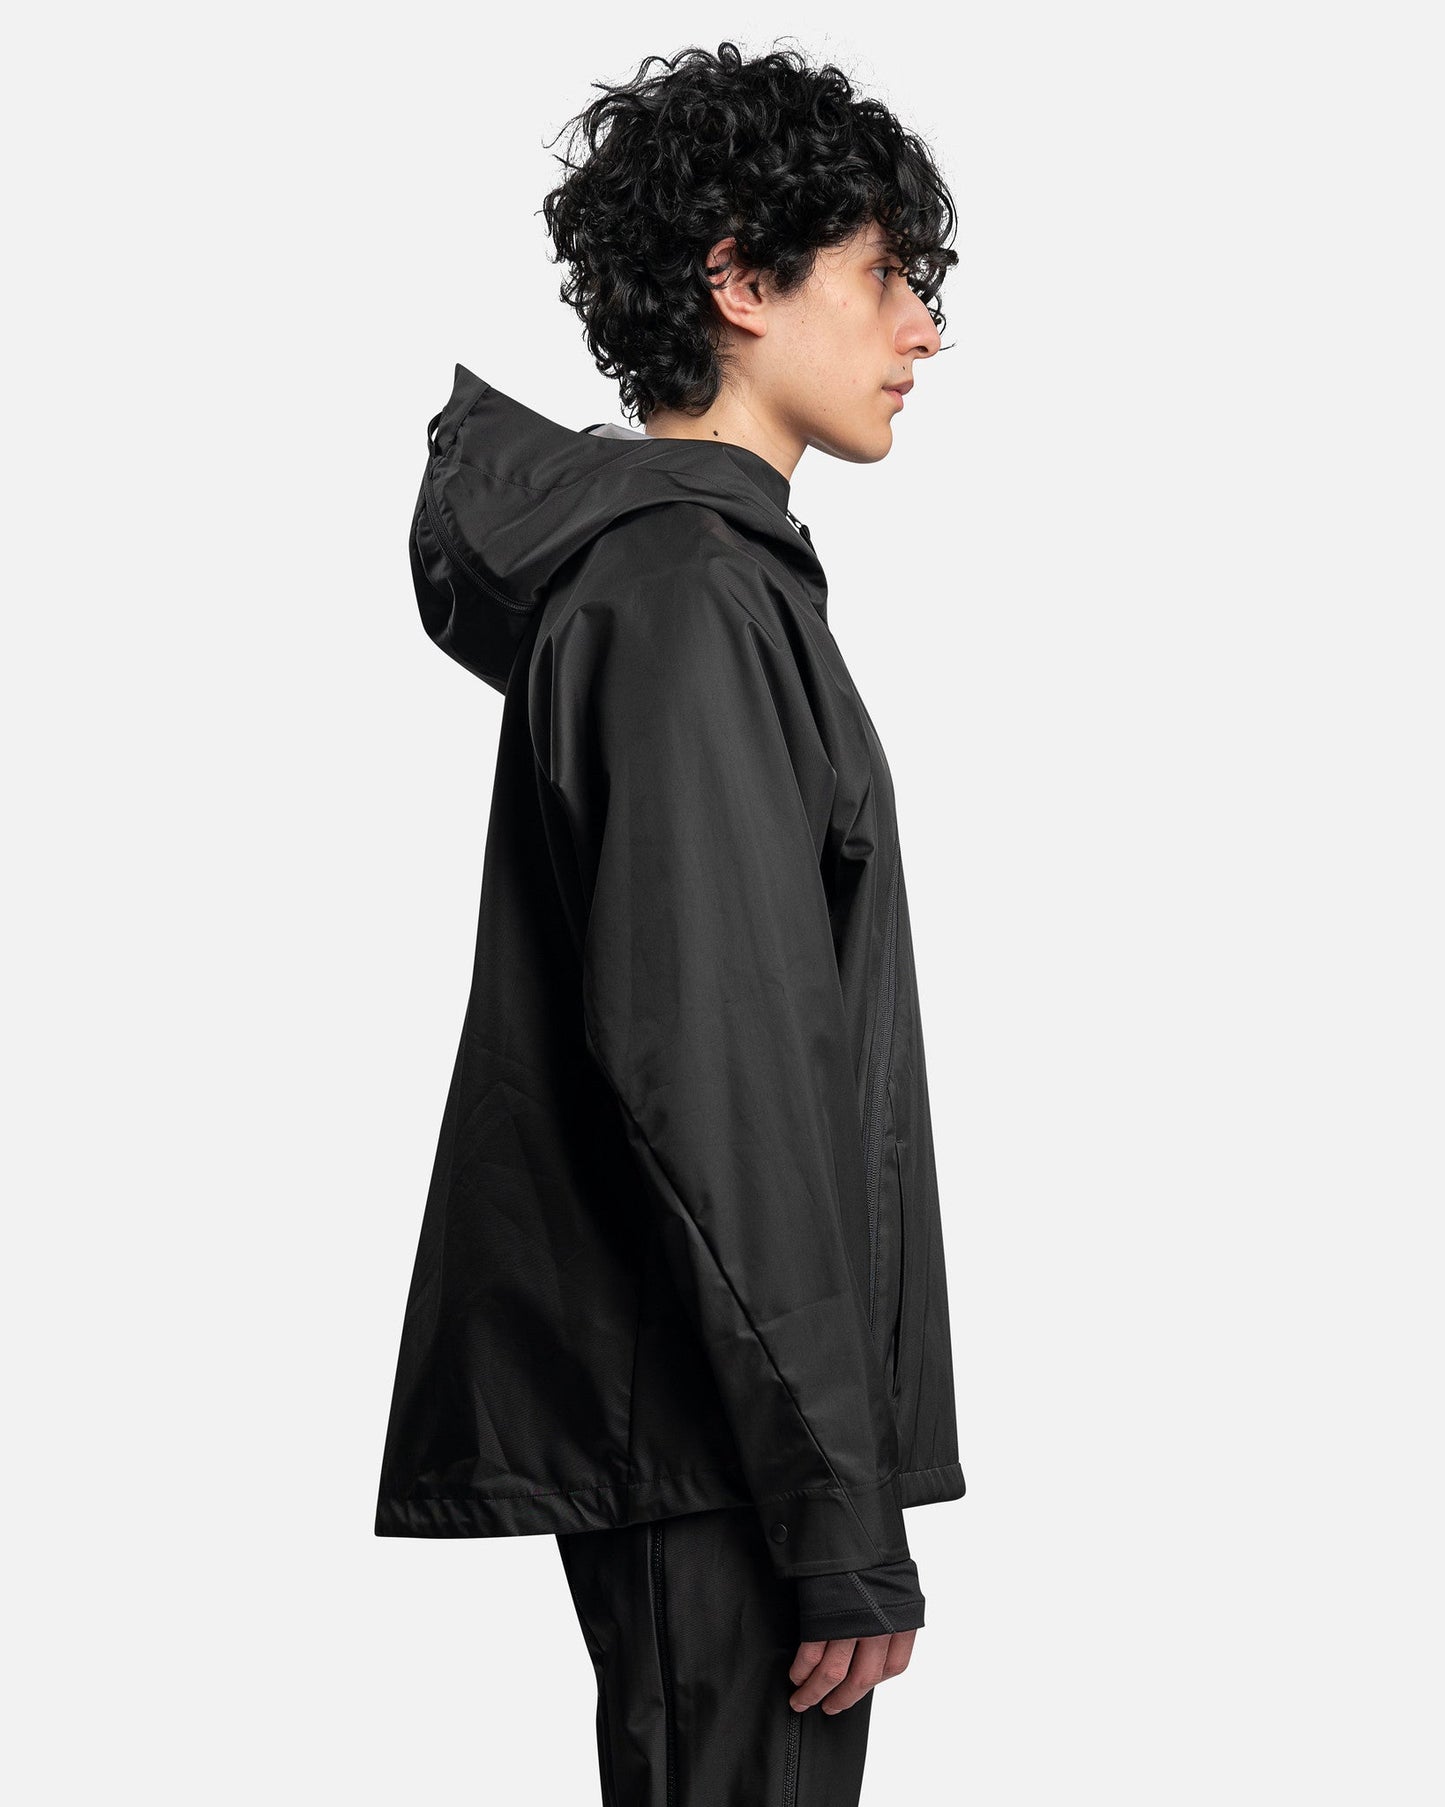 POST ARCHIVE FACTION (P.A.F) Men's Jackets 5.0 Technical Jacket Center in Black